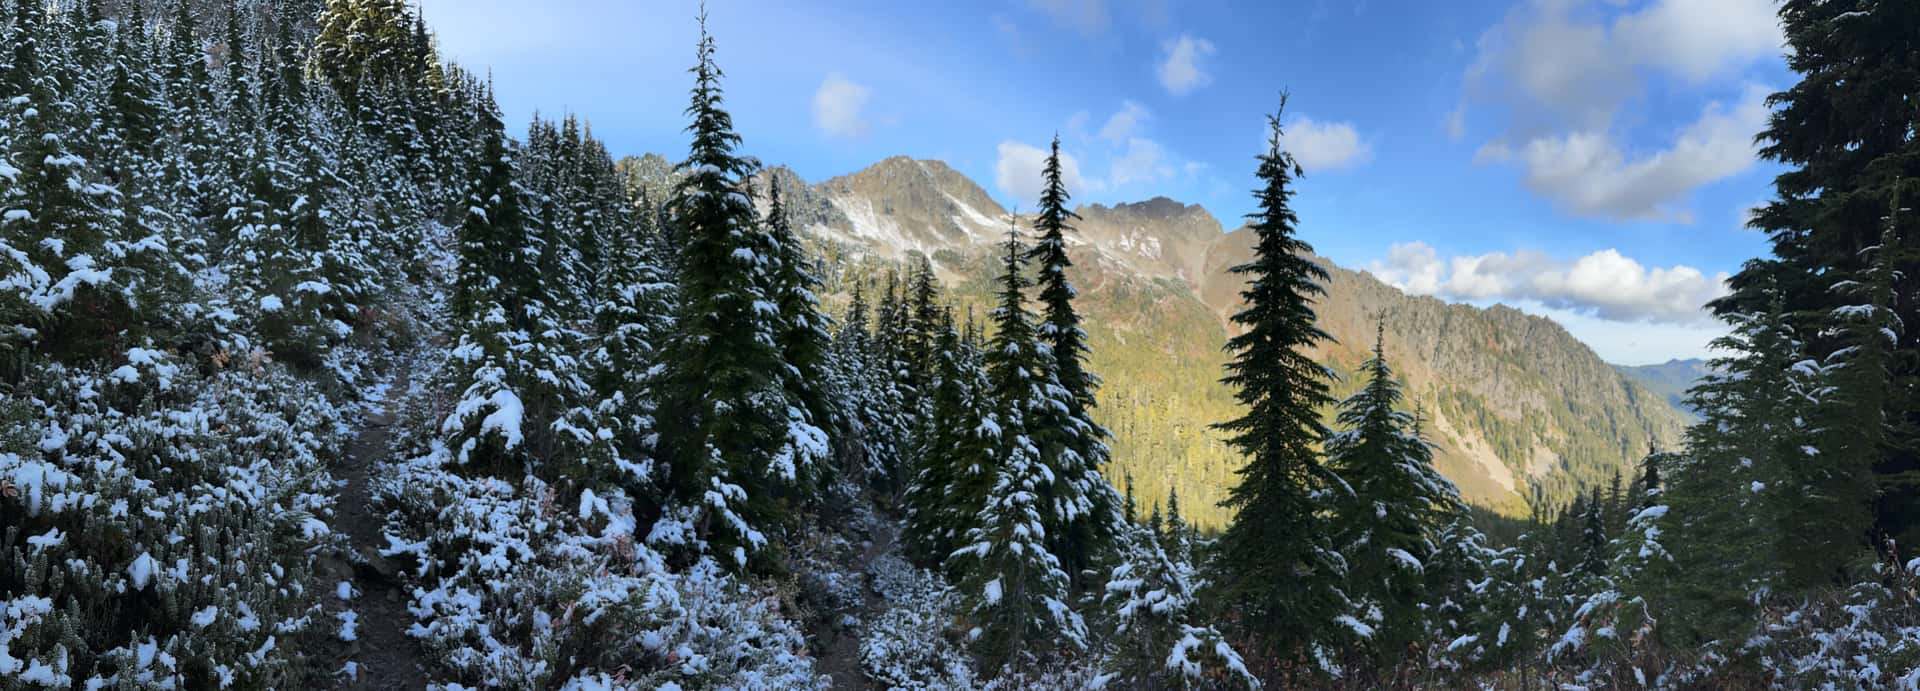 view of Mt. Appleton from the snowy Appleton Pass Trail